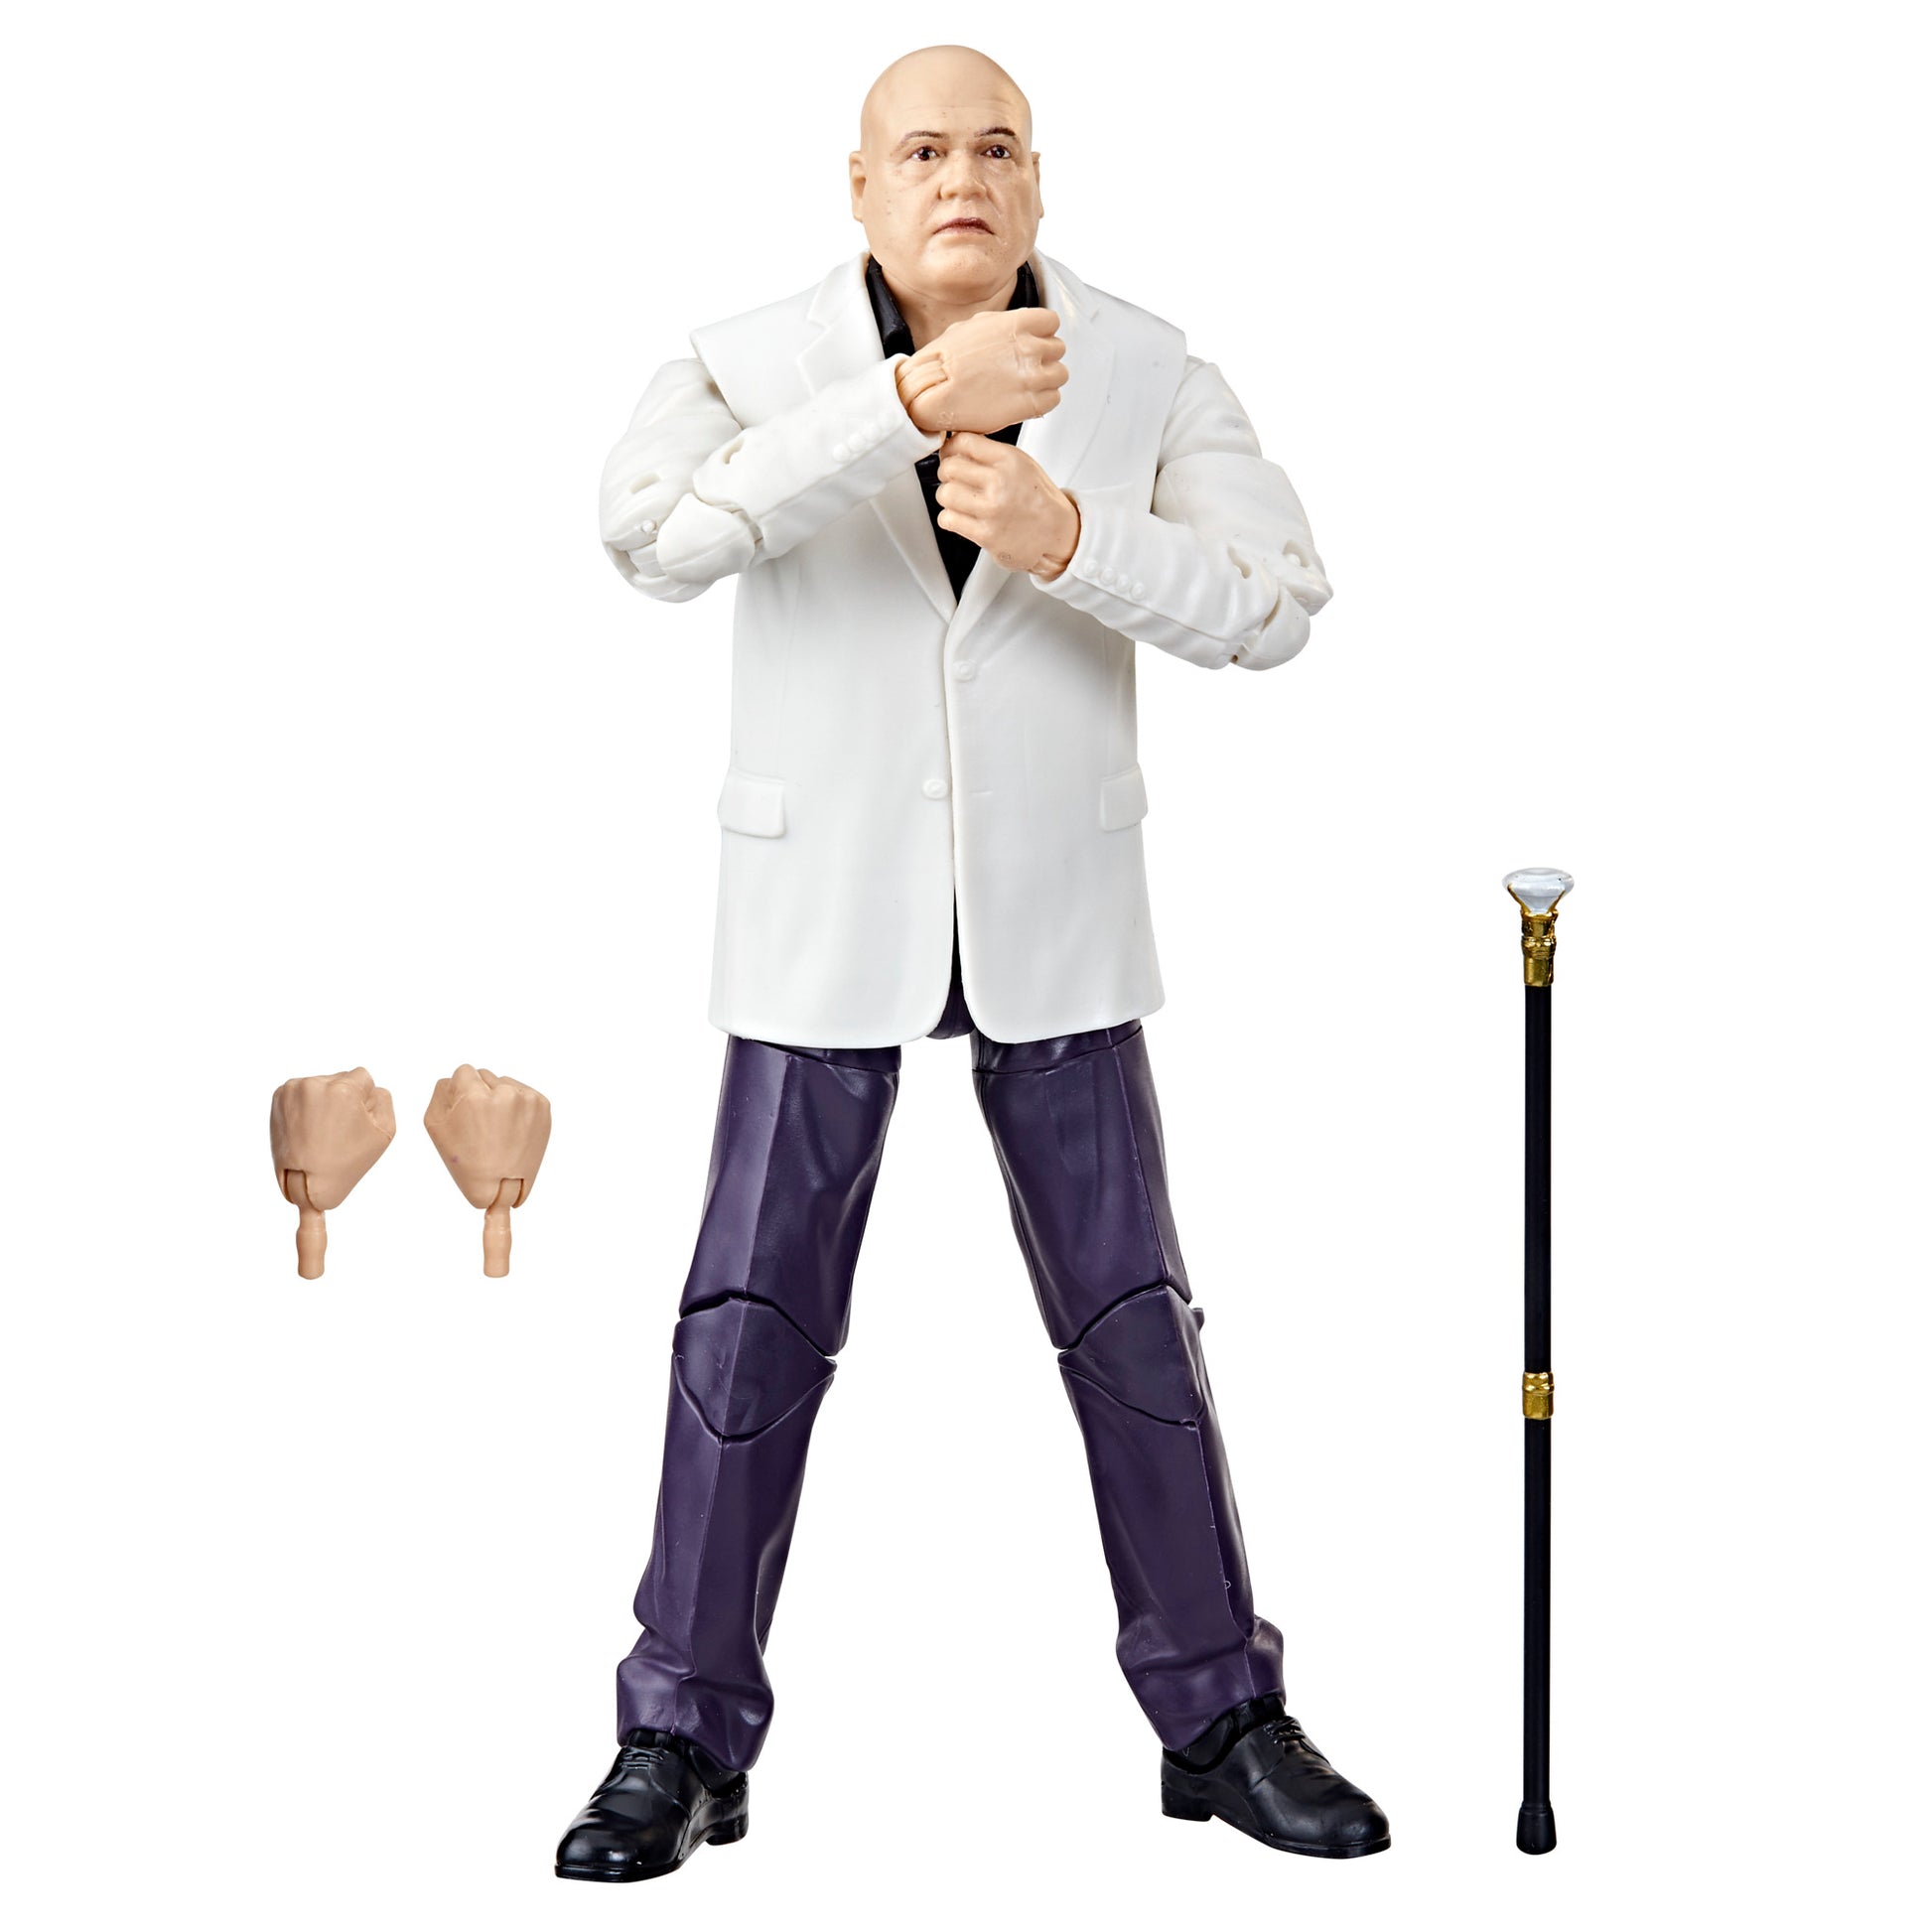 Hasbro Marvel Legends Series Kingpin Action Figure 6-Inch Toy - Heretoserveyou